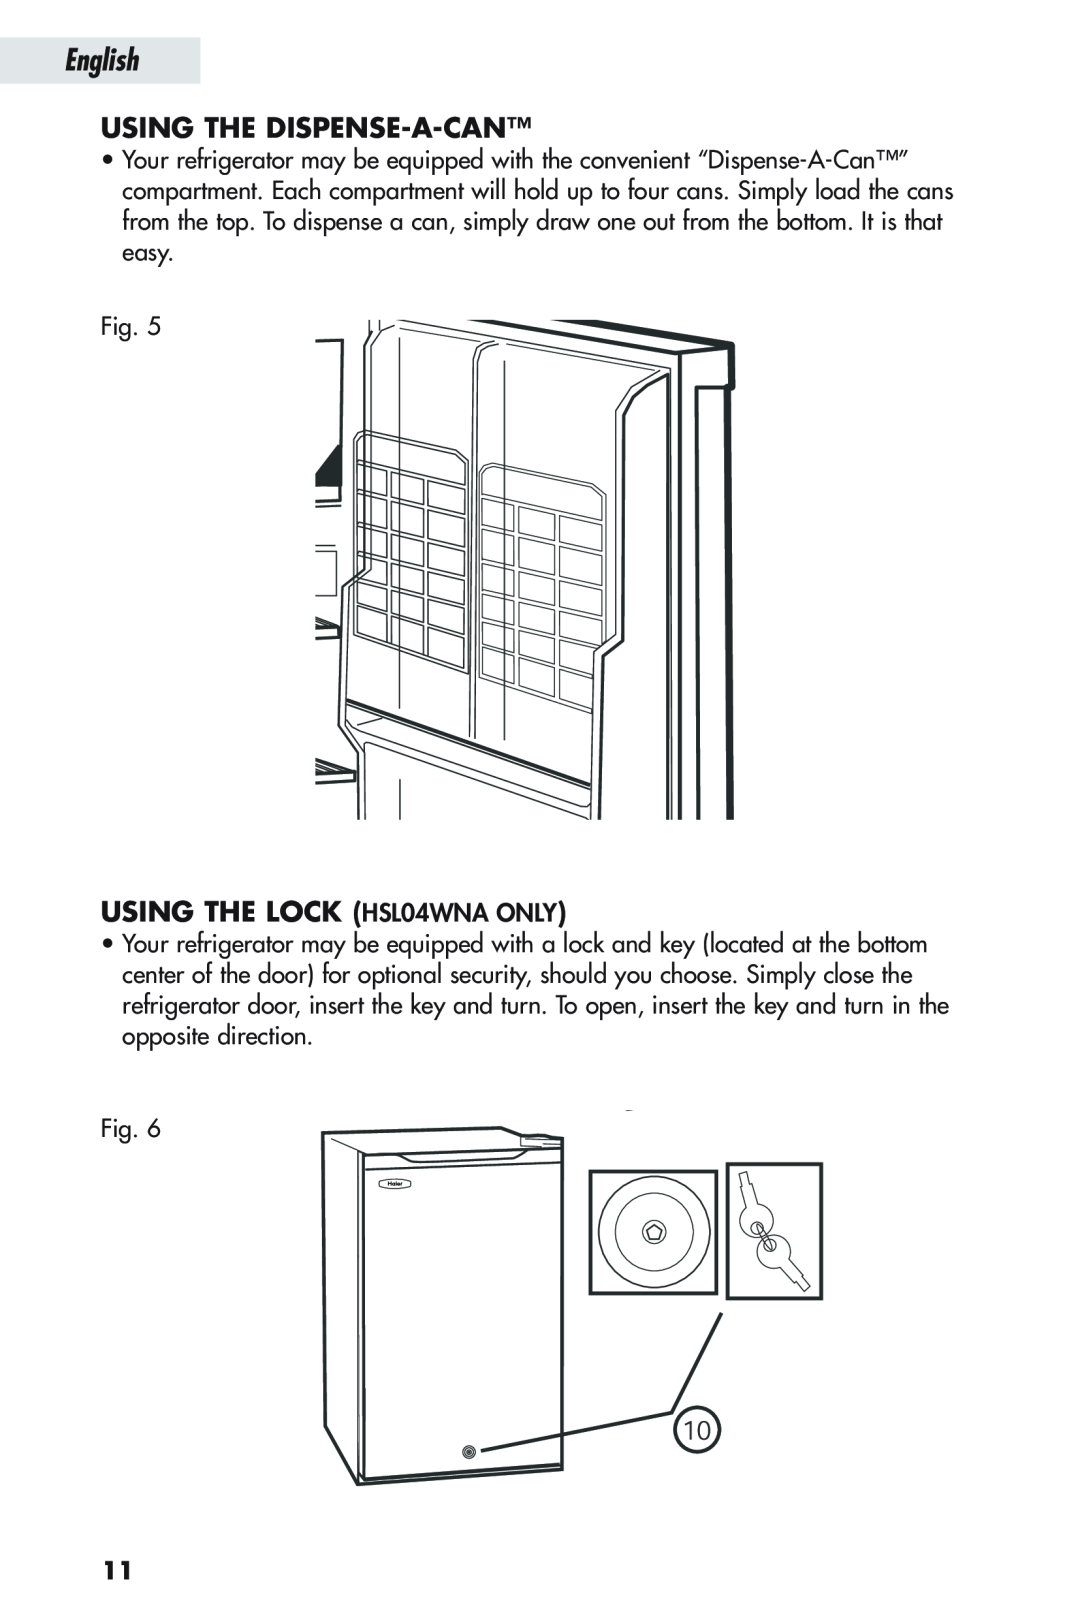 Haier HSP04WNB user manual Using The Dispense-A-Can, USING THE LOCK HSL04WNA ONLY, English 